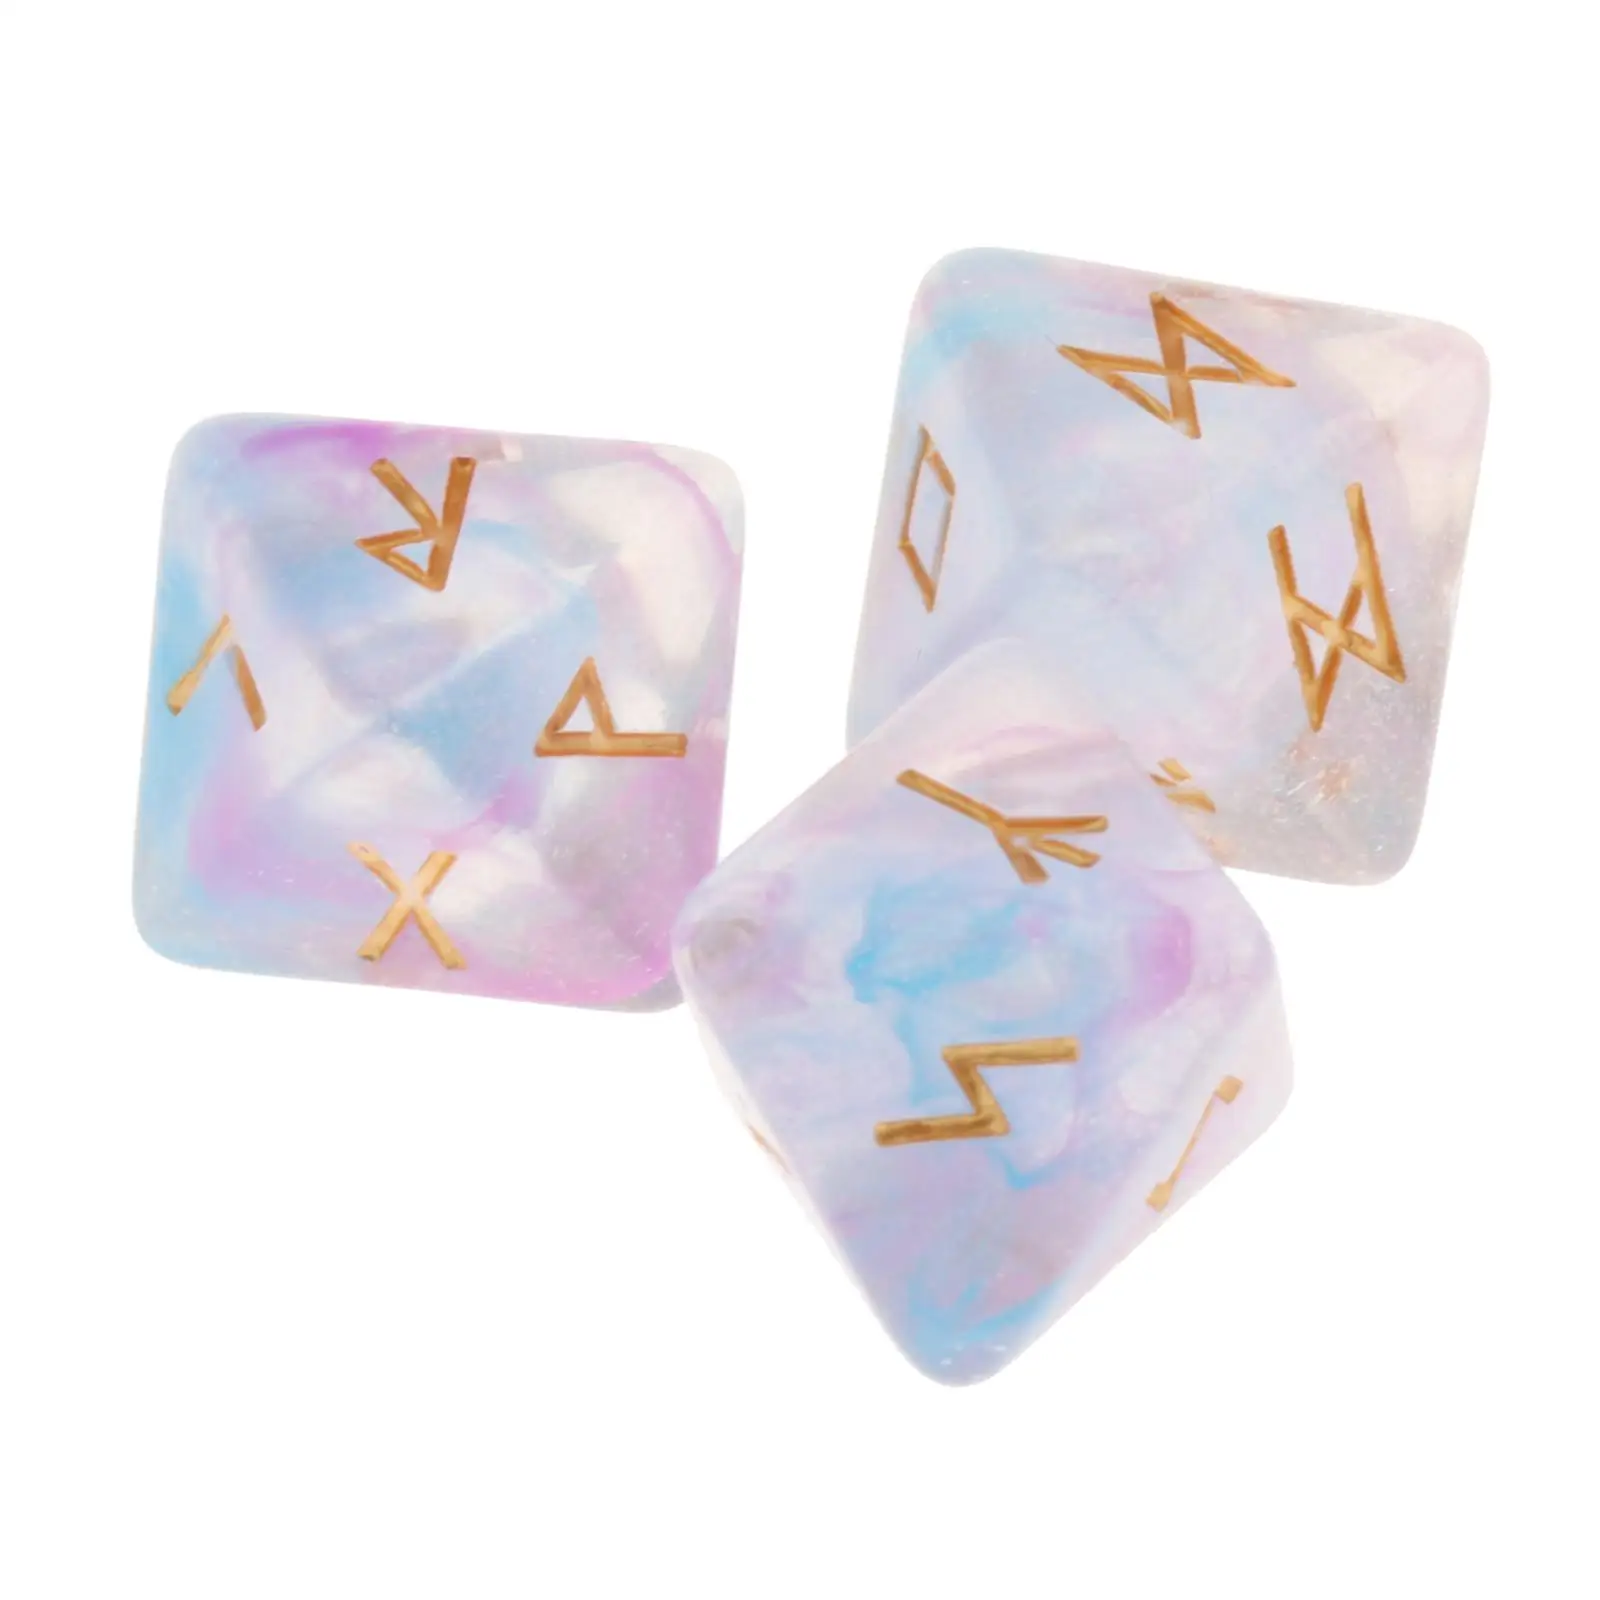 Starry Star Tarot Exquisite Divination Dice Astrology Constellation for